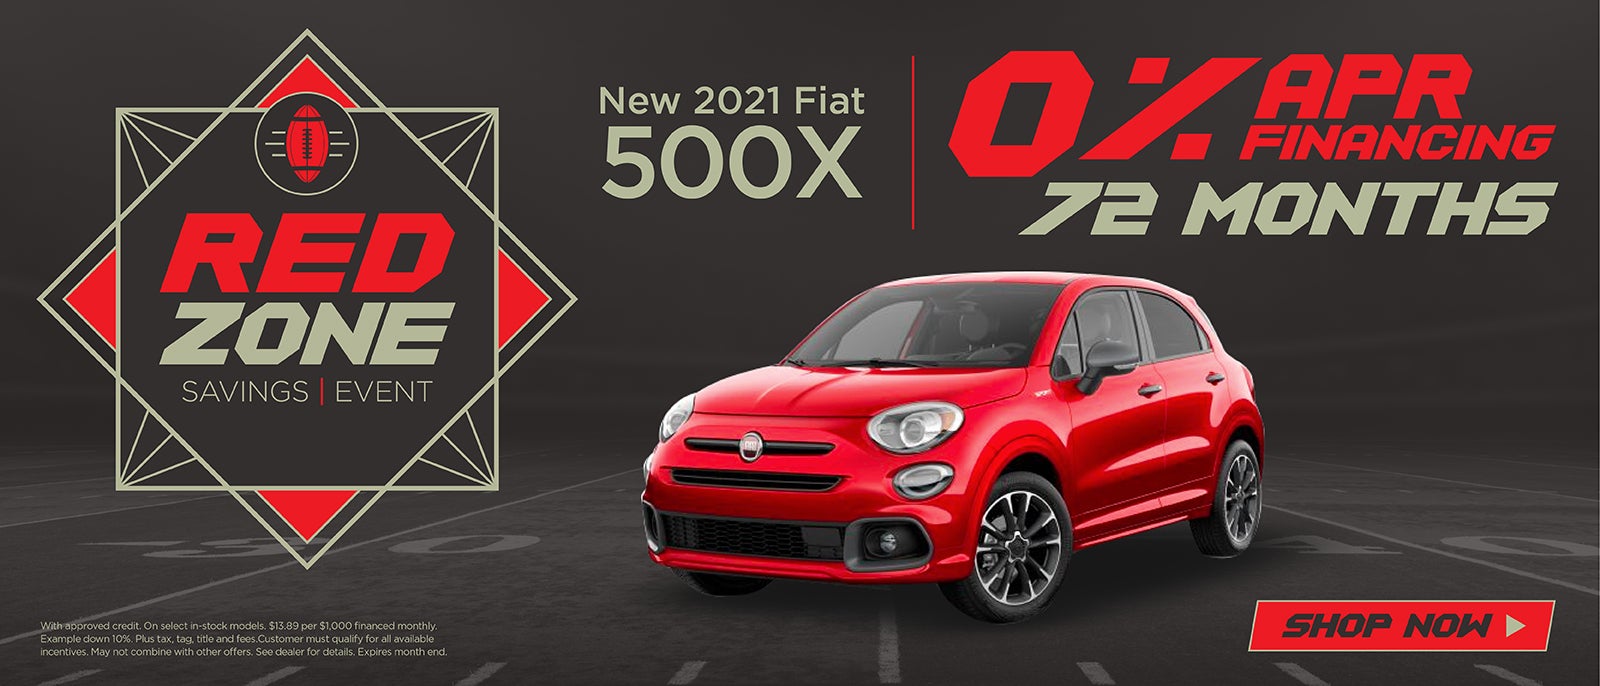 New 2021 Fiat 500X Red Zone Event